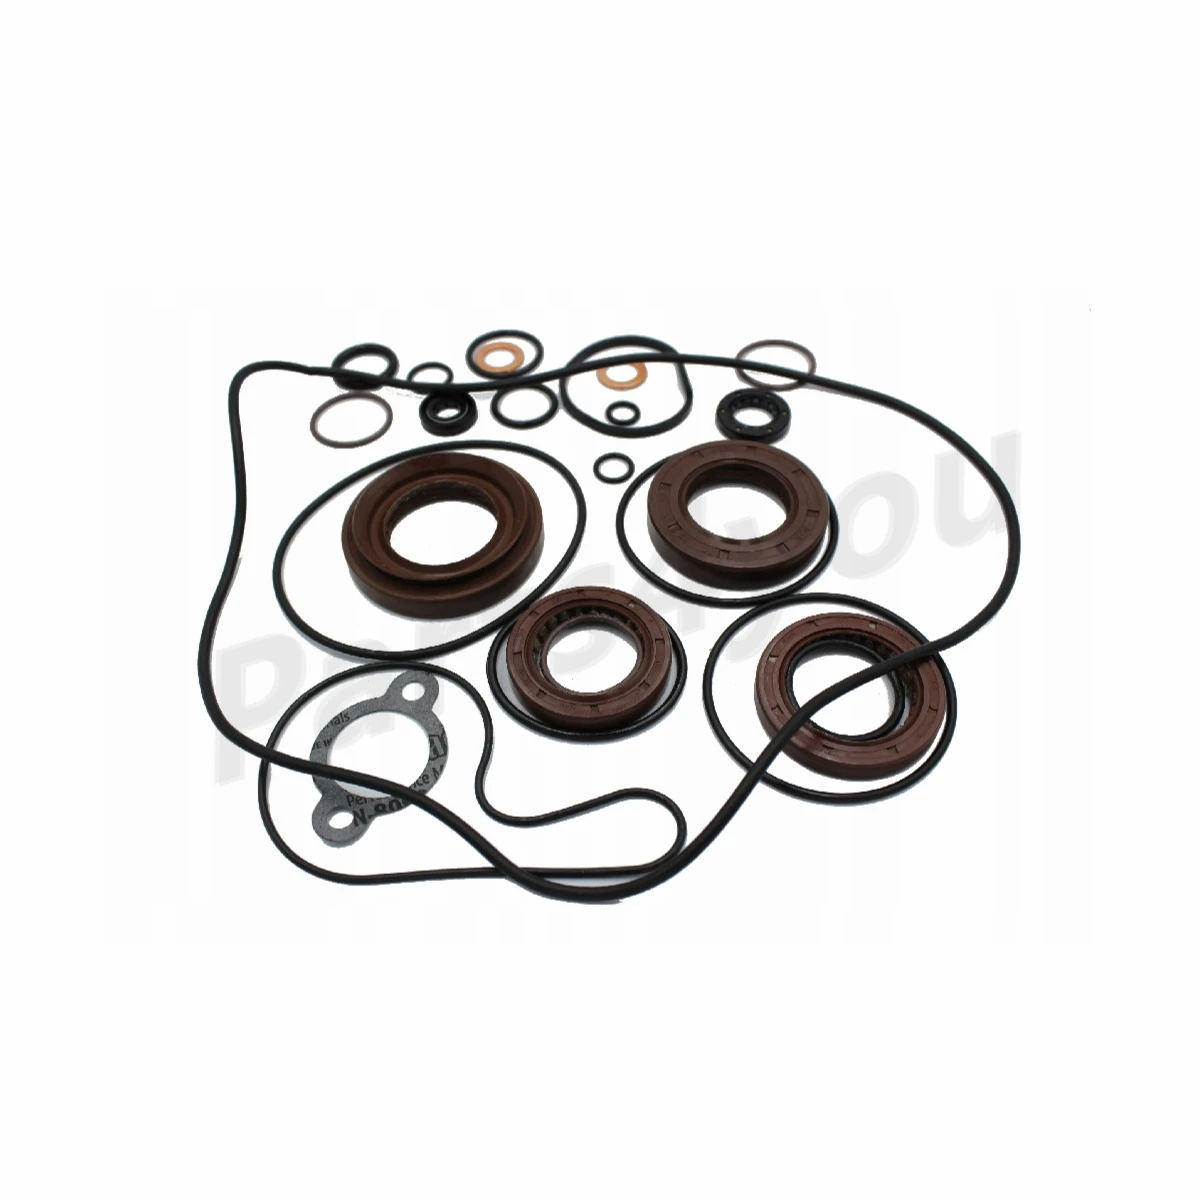 

Engine Oil Seal & O-Seal Ring Kit for CFMoto CForce 400 450 500S 520 600 Touring UForce 550 Z550 600 ZForce 550 Z550 0GS0-0000A1